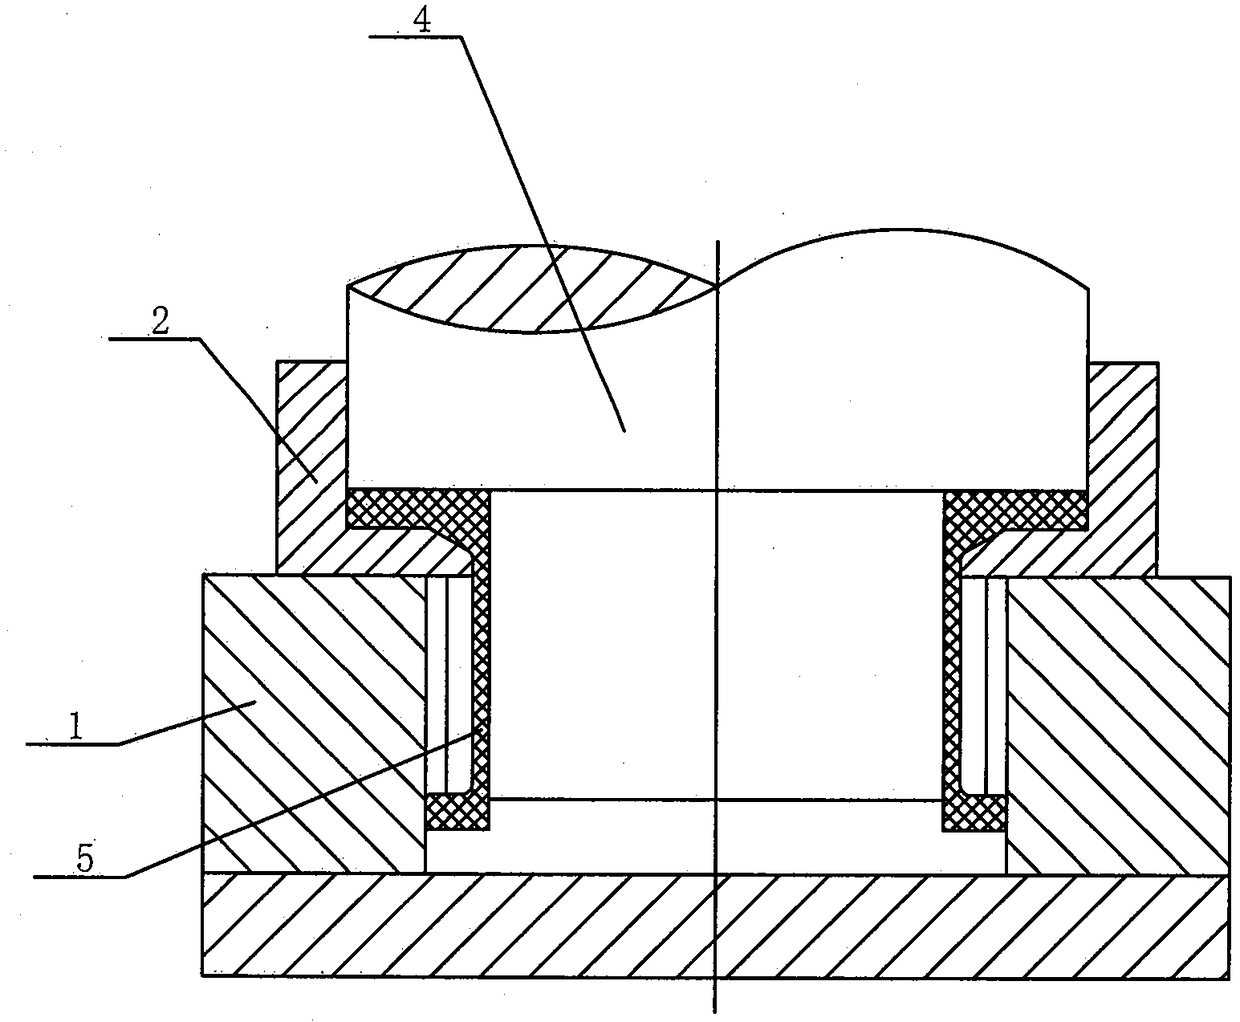 Axial-radial flow dividing extrusion forming method for thin-walled wide-flange vertical bar tubular member